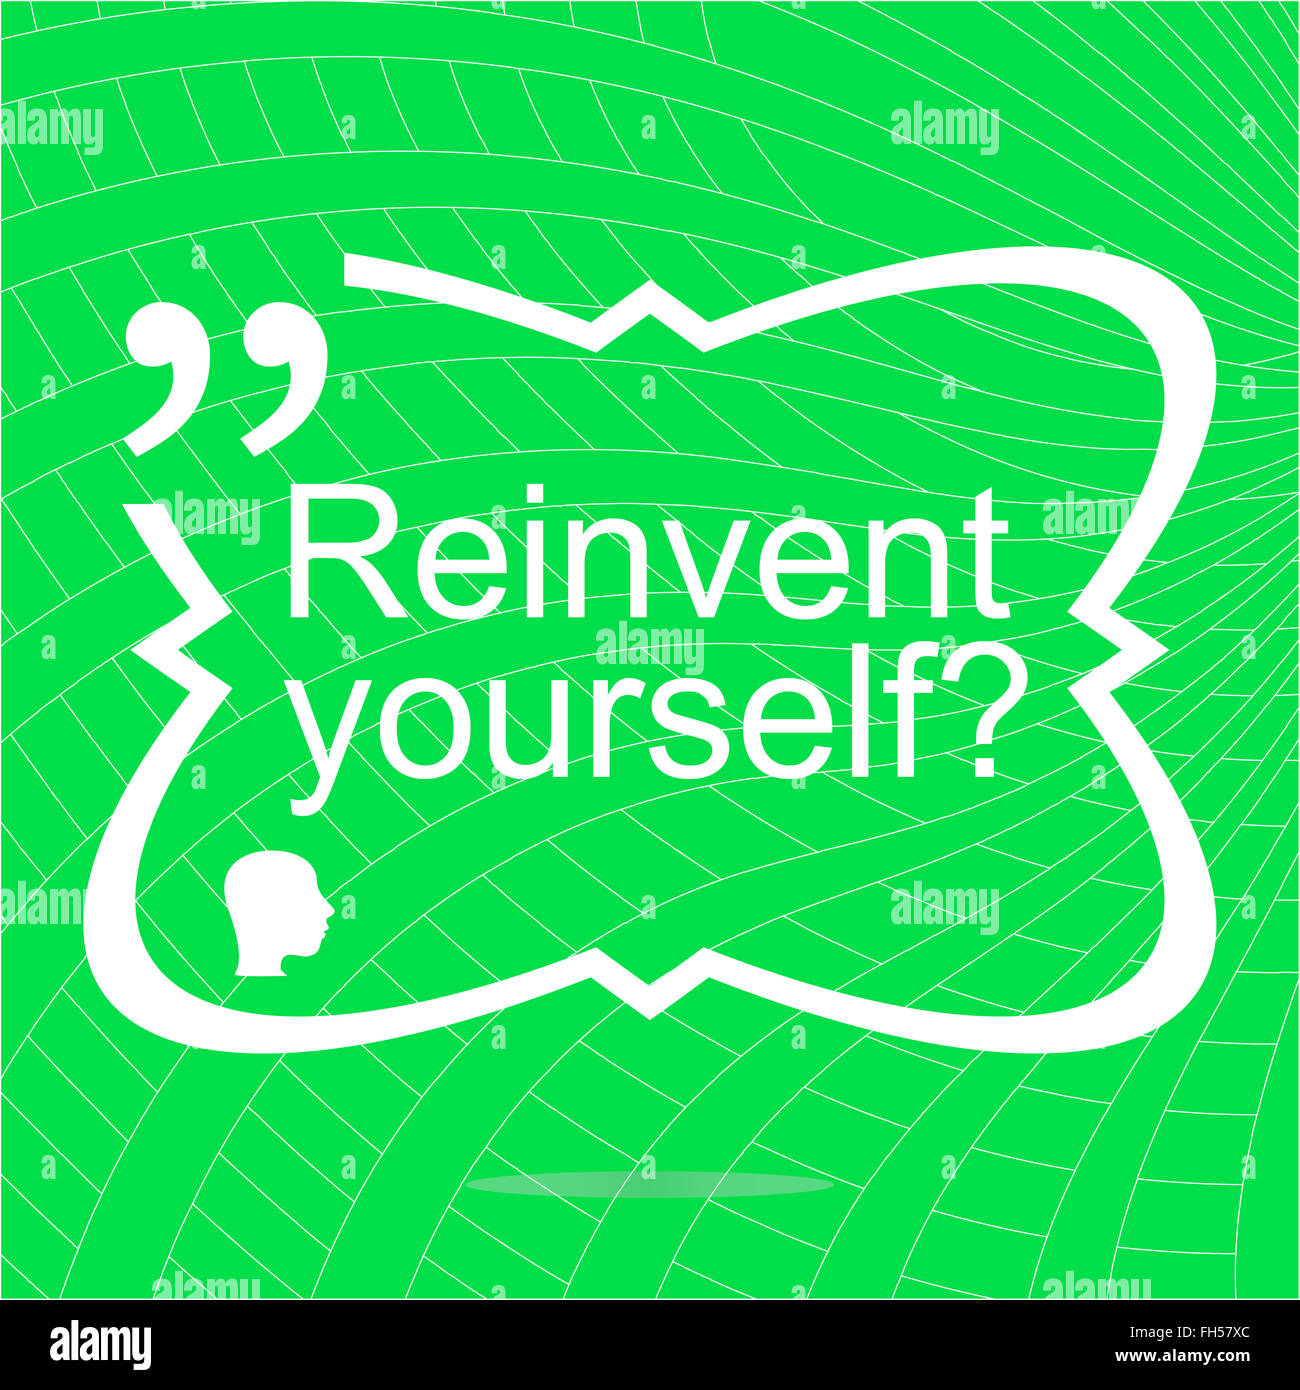 Reinvent yourself. Inspirational motivational quote. Simple trendy design. Positive quote. Vector illustration Stock Photo